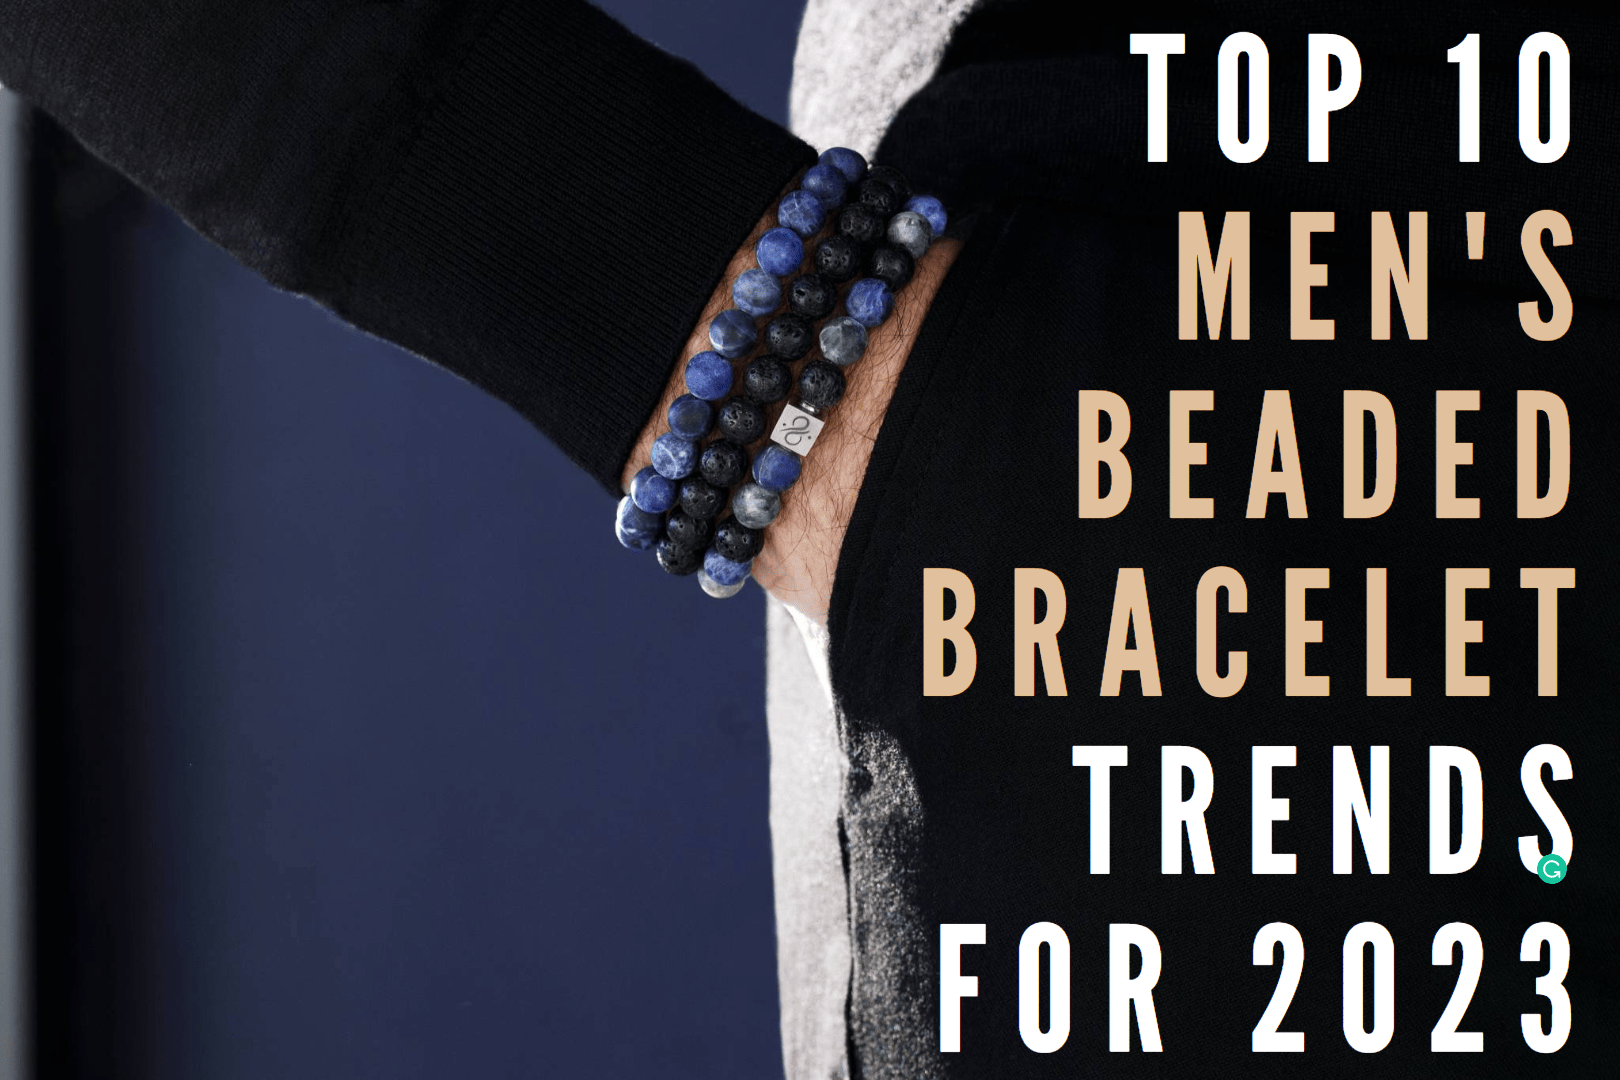 2023 Bracelet Trends to Look For